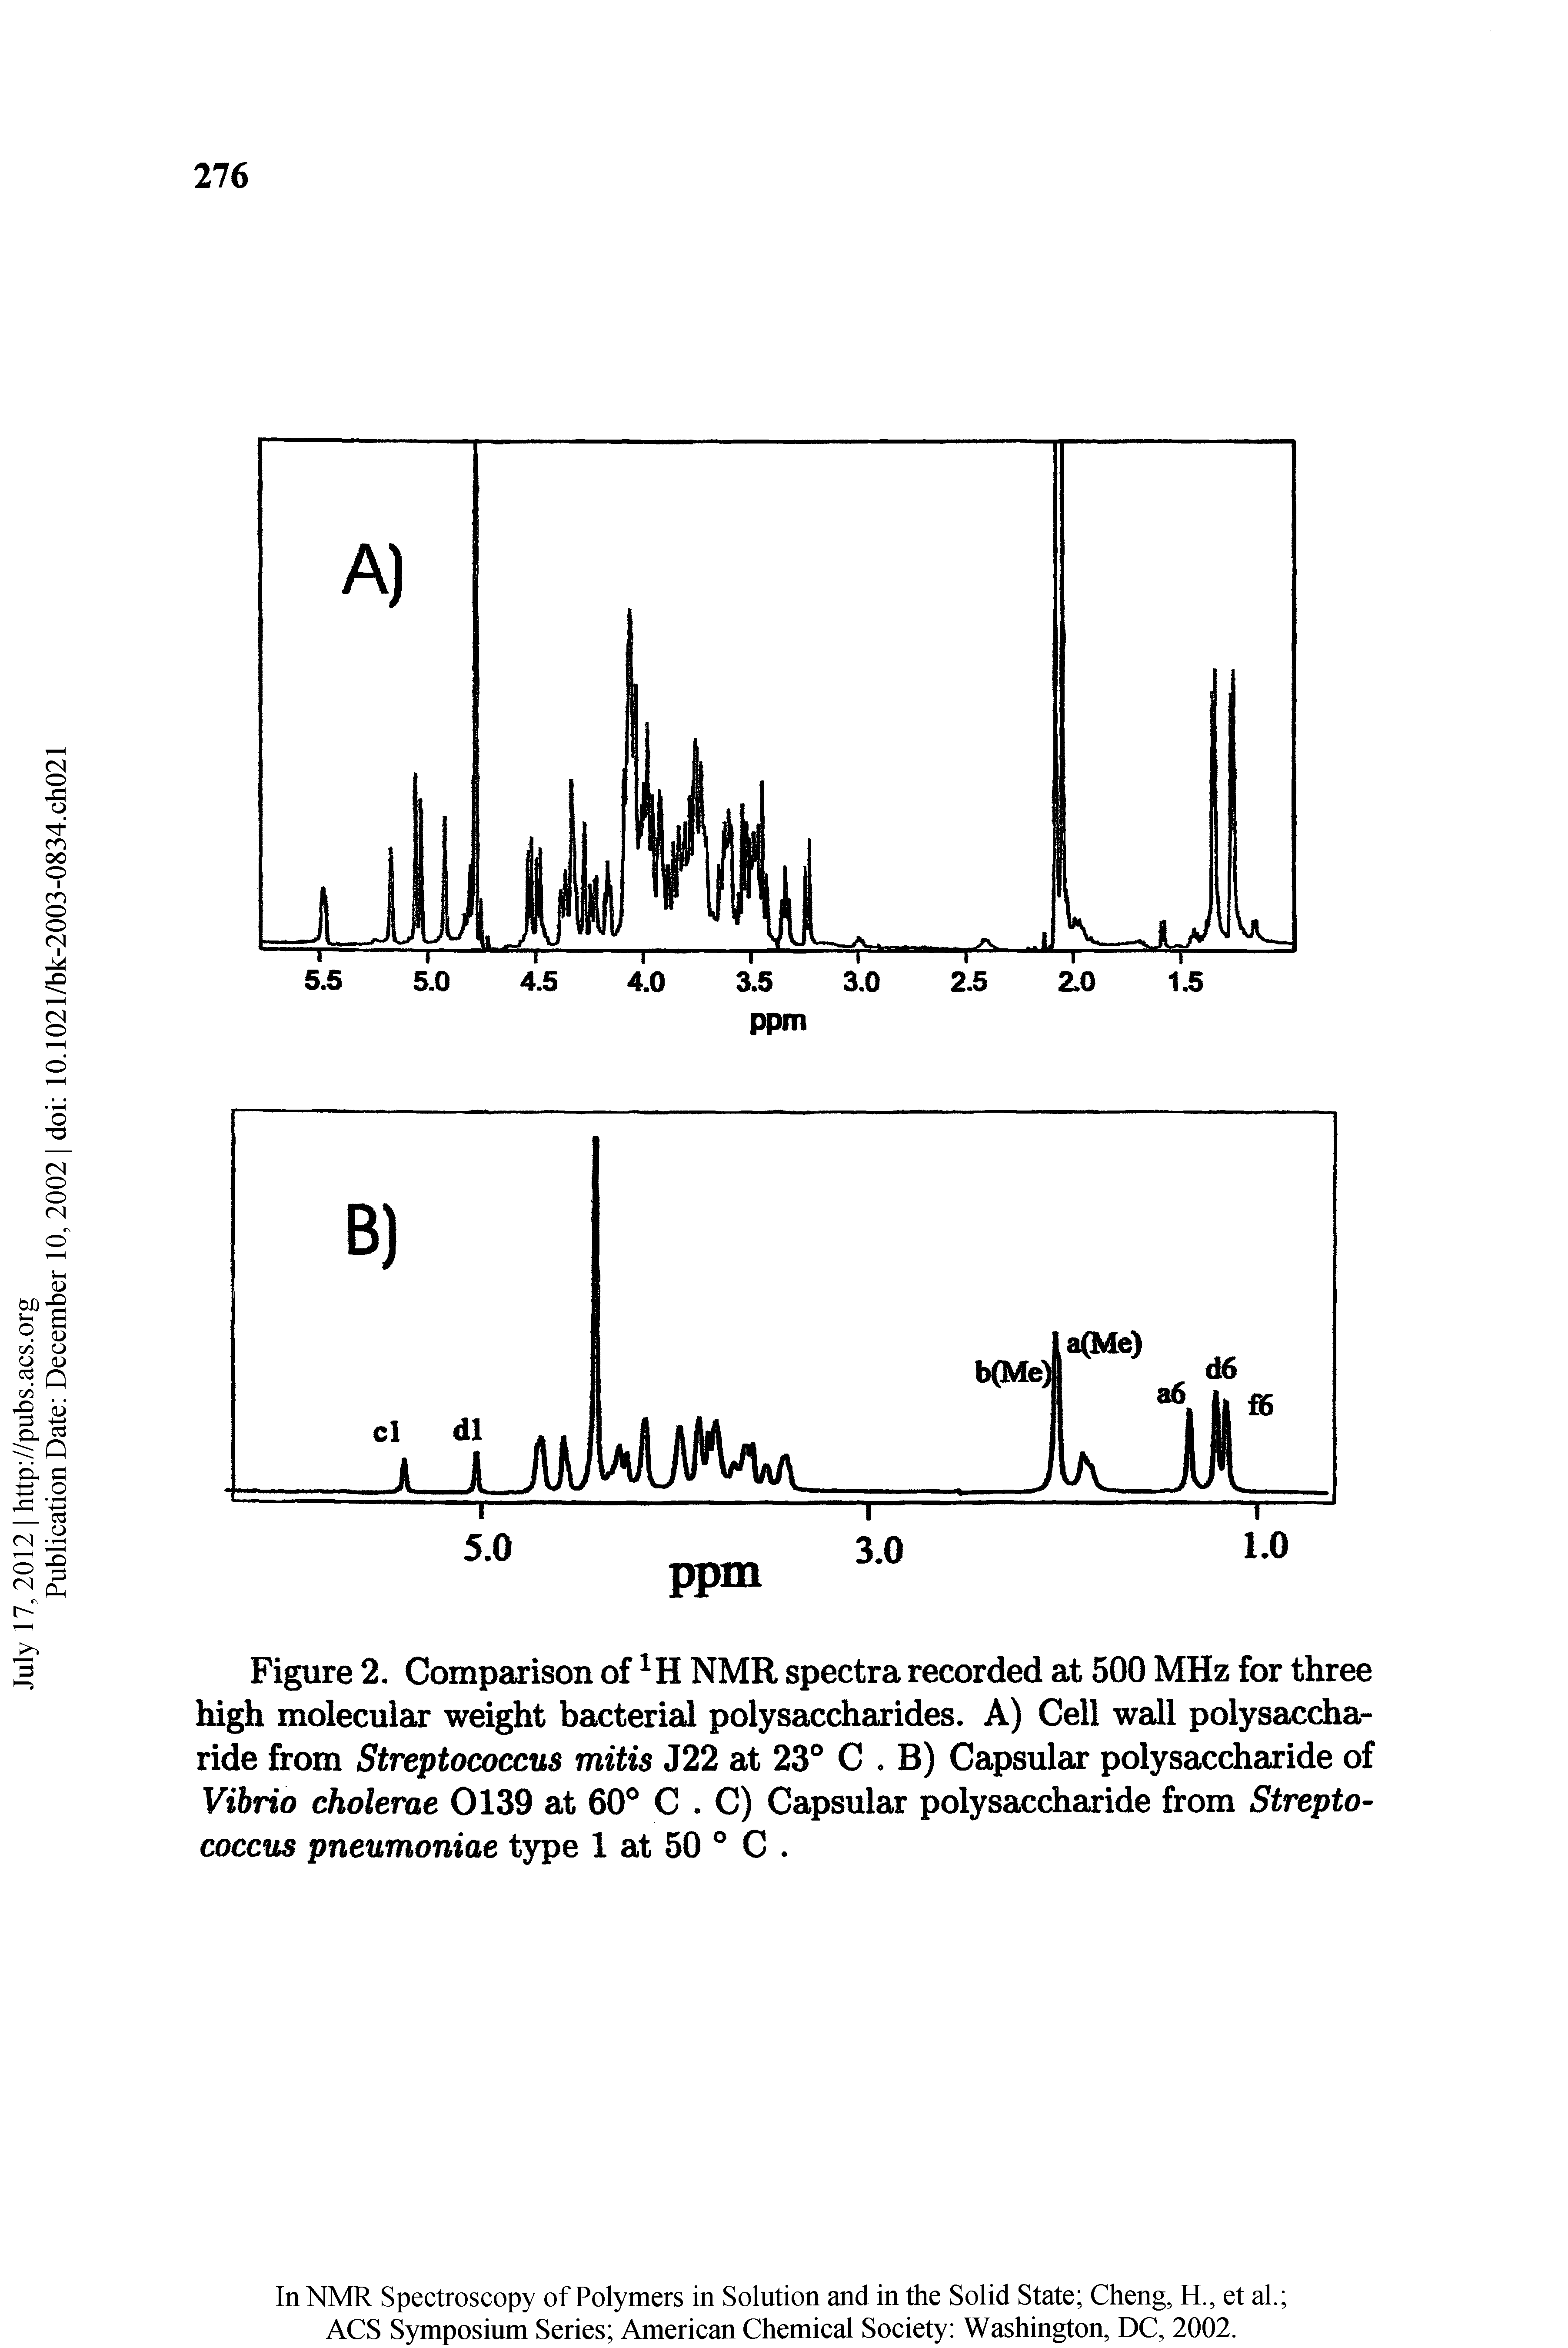 Figure 2. Comparison of NMR spectra recorded at 500 MHz for three high molecular weight bacterial polysaccharides. A) Cell wall polysaccharide from Streptococcus mitis J22 at 23° C. B) Capsular polysaccharide of Vibrio cholerae 0139 at 60° C. C) Capsular polysaccharide from Streptococcus pneumoniae type 1 at 50 ° C. ...